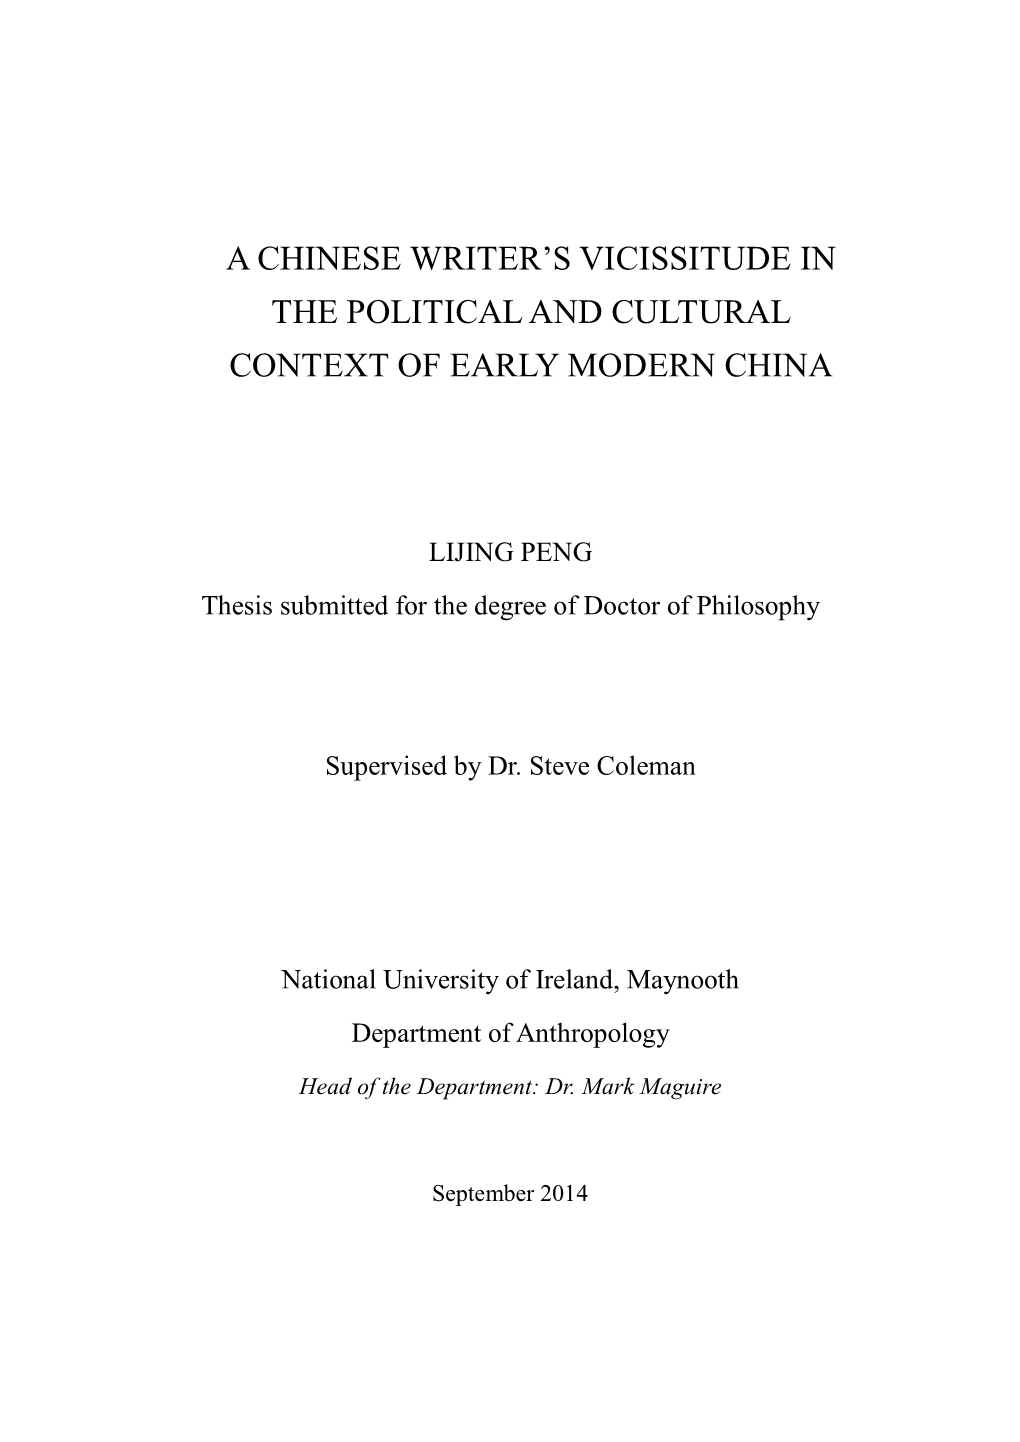 A Chinese Writer's Vicissitude in the Political and Cultural Context of Early